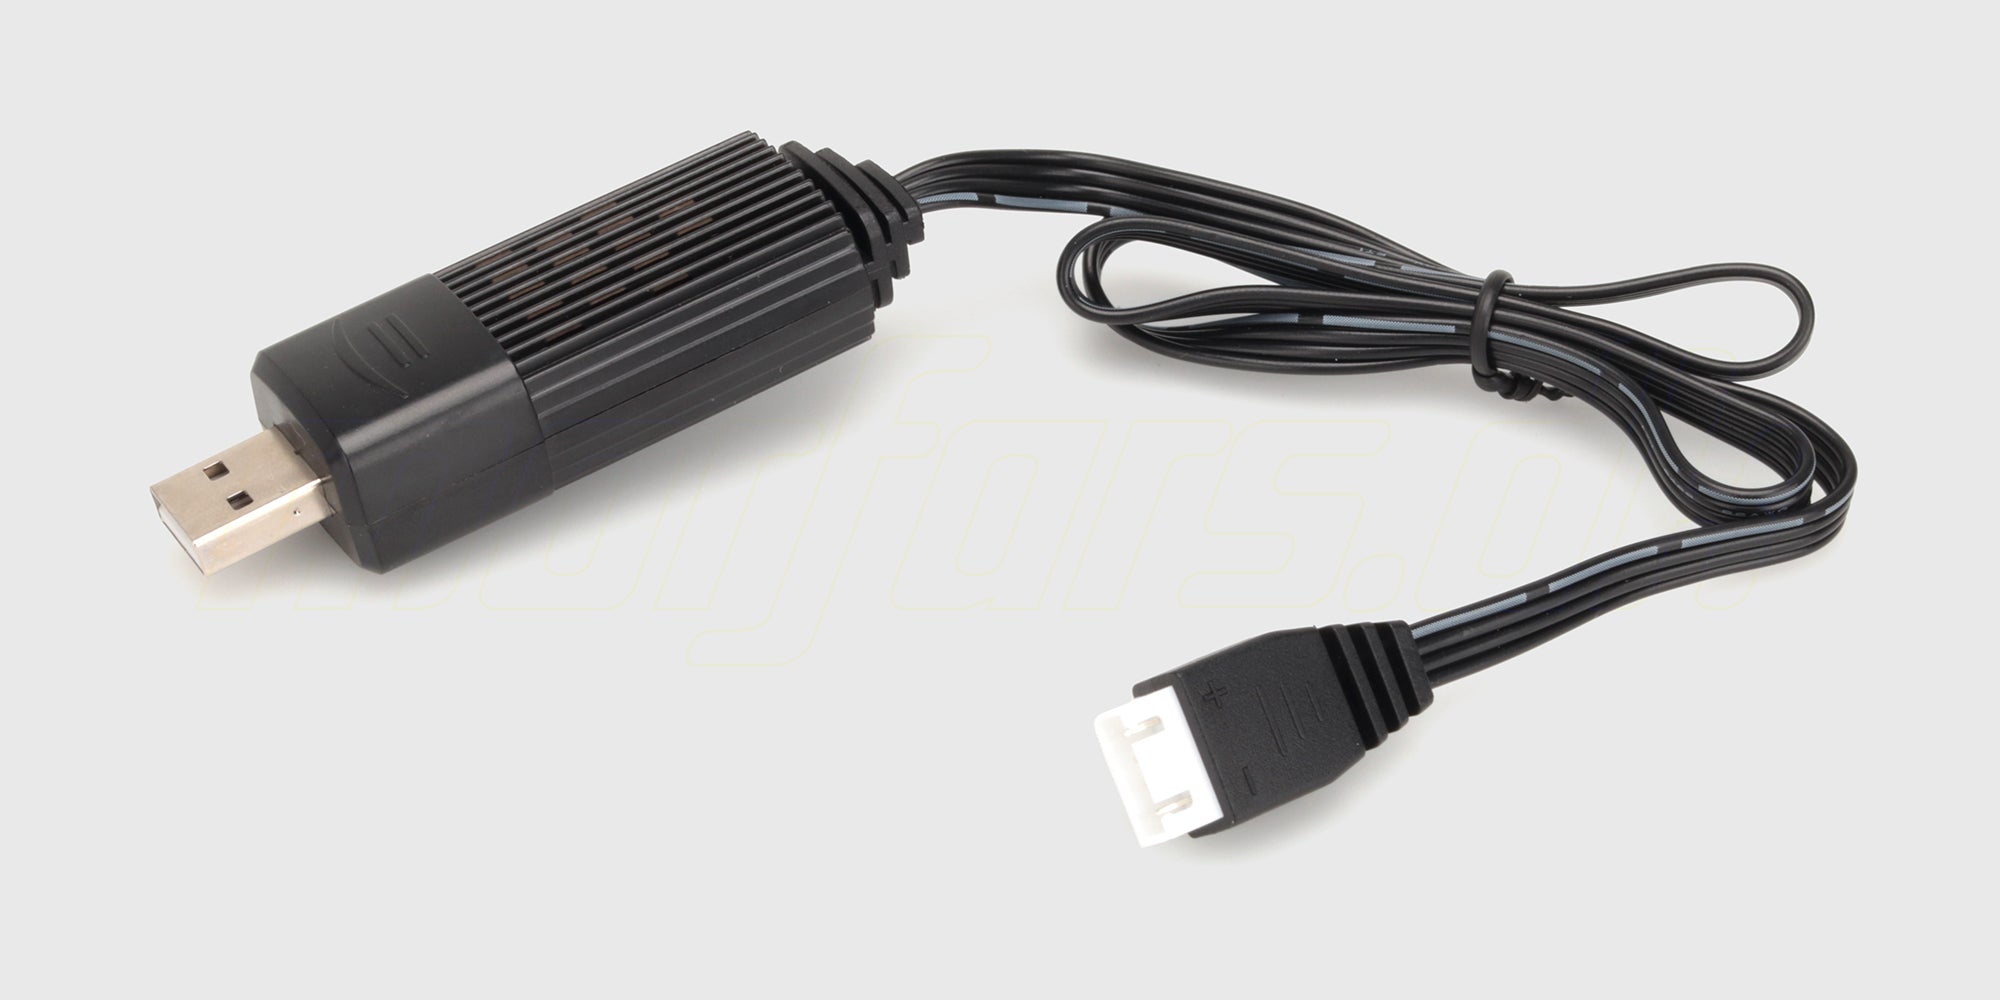 HyperGo USB charging cable for 3S battery